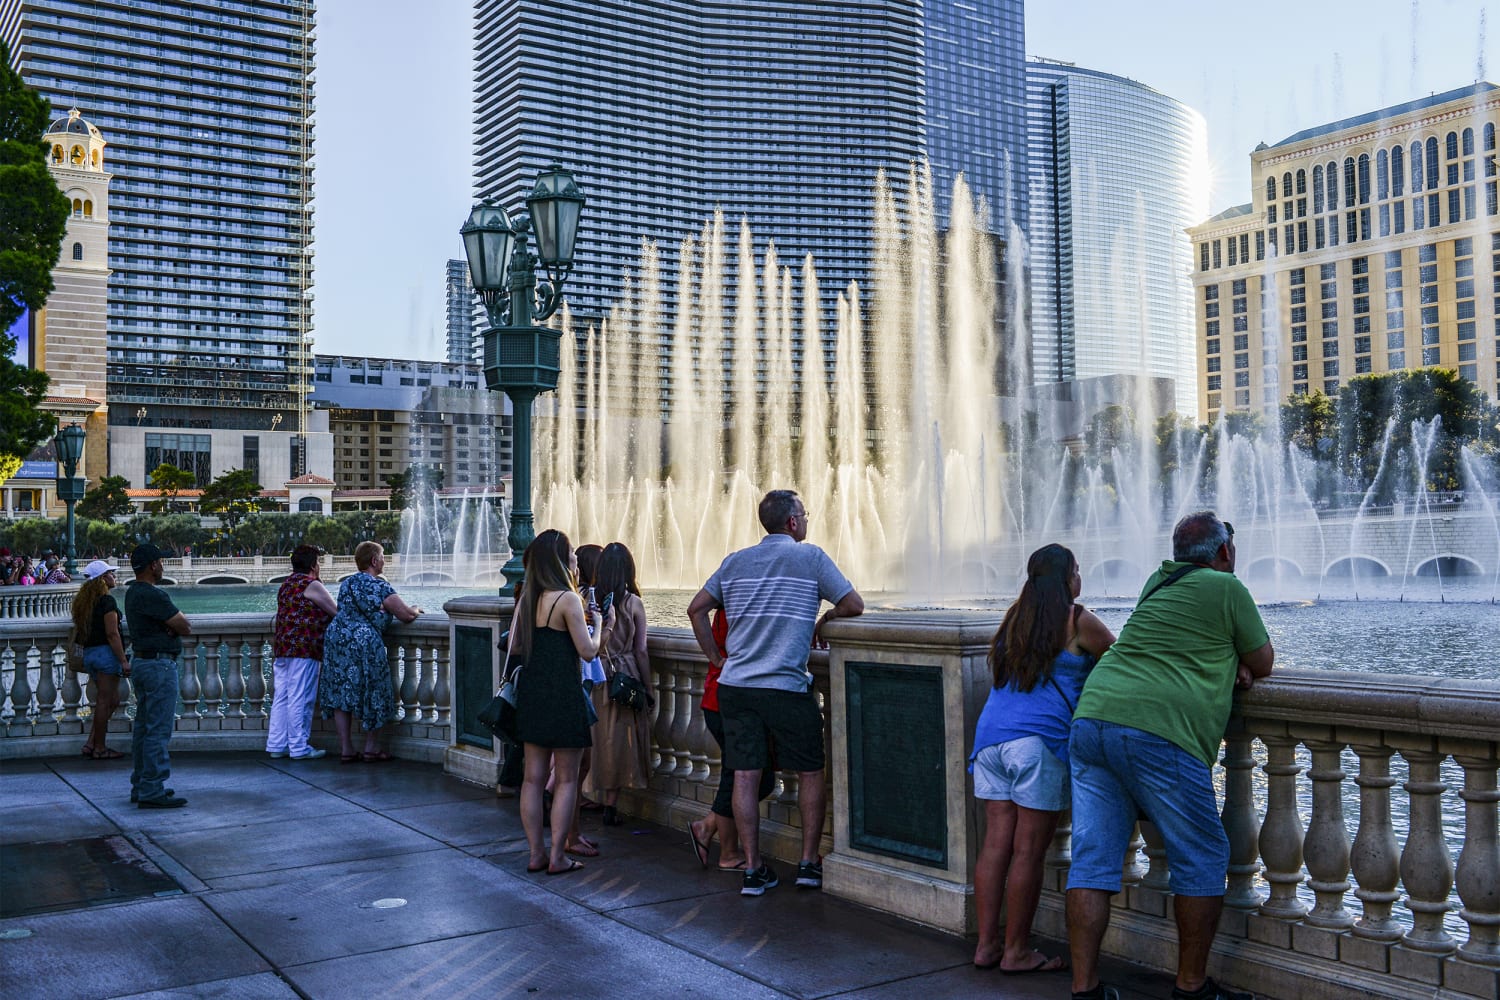 We live in a desert. We have to act like it': Las Vegas faces reality of  drought, Climate crisis